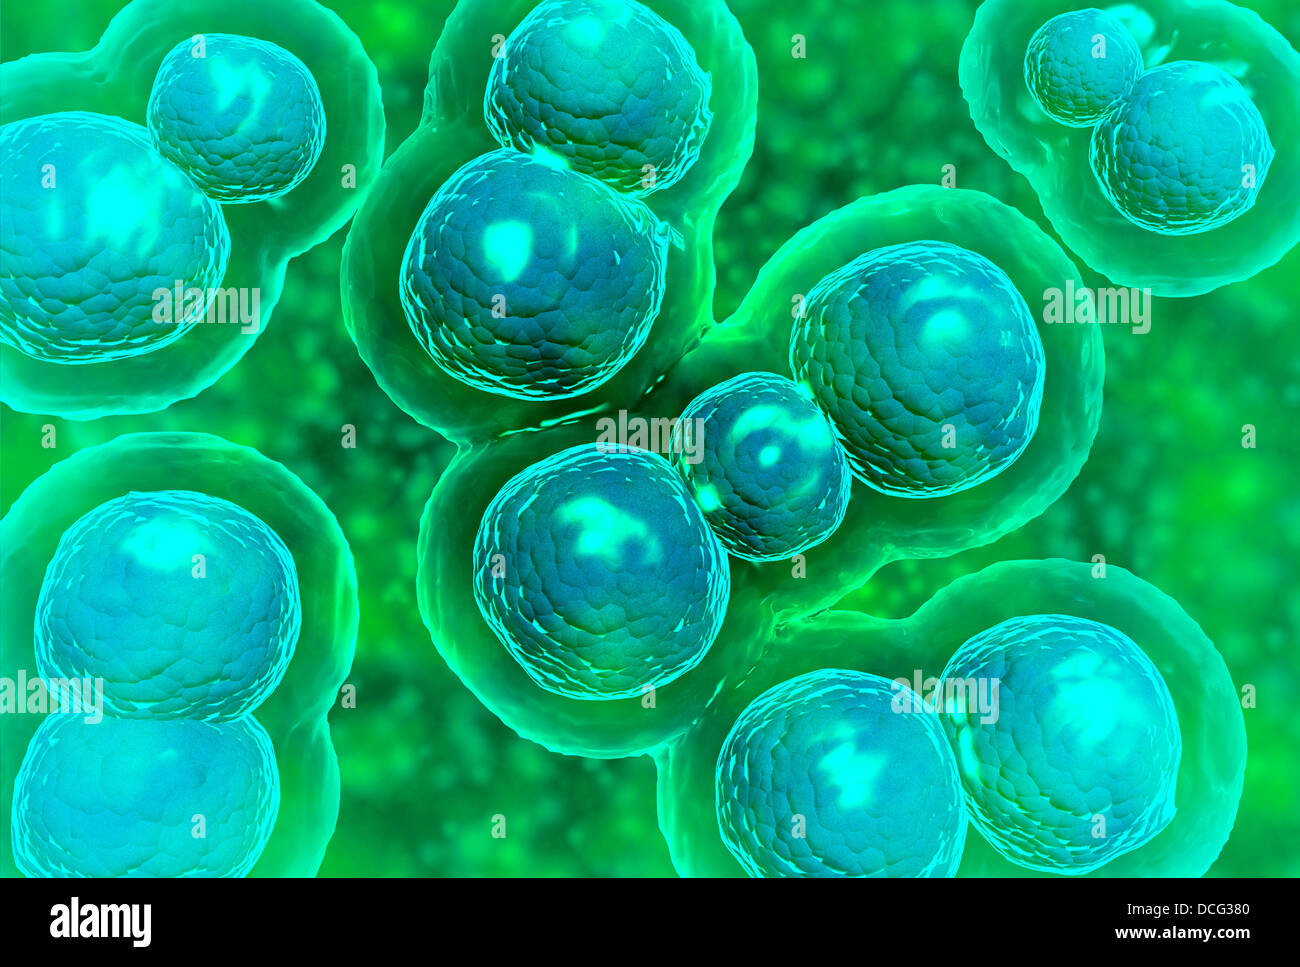 Microscopic view of chlamydia. Chlamydia is a common sexually transmitted disease (STD) caused by a bacterium. Stock Photo